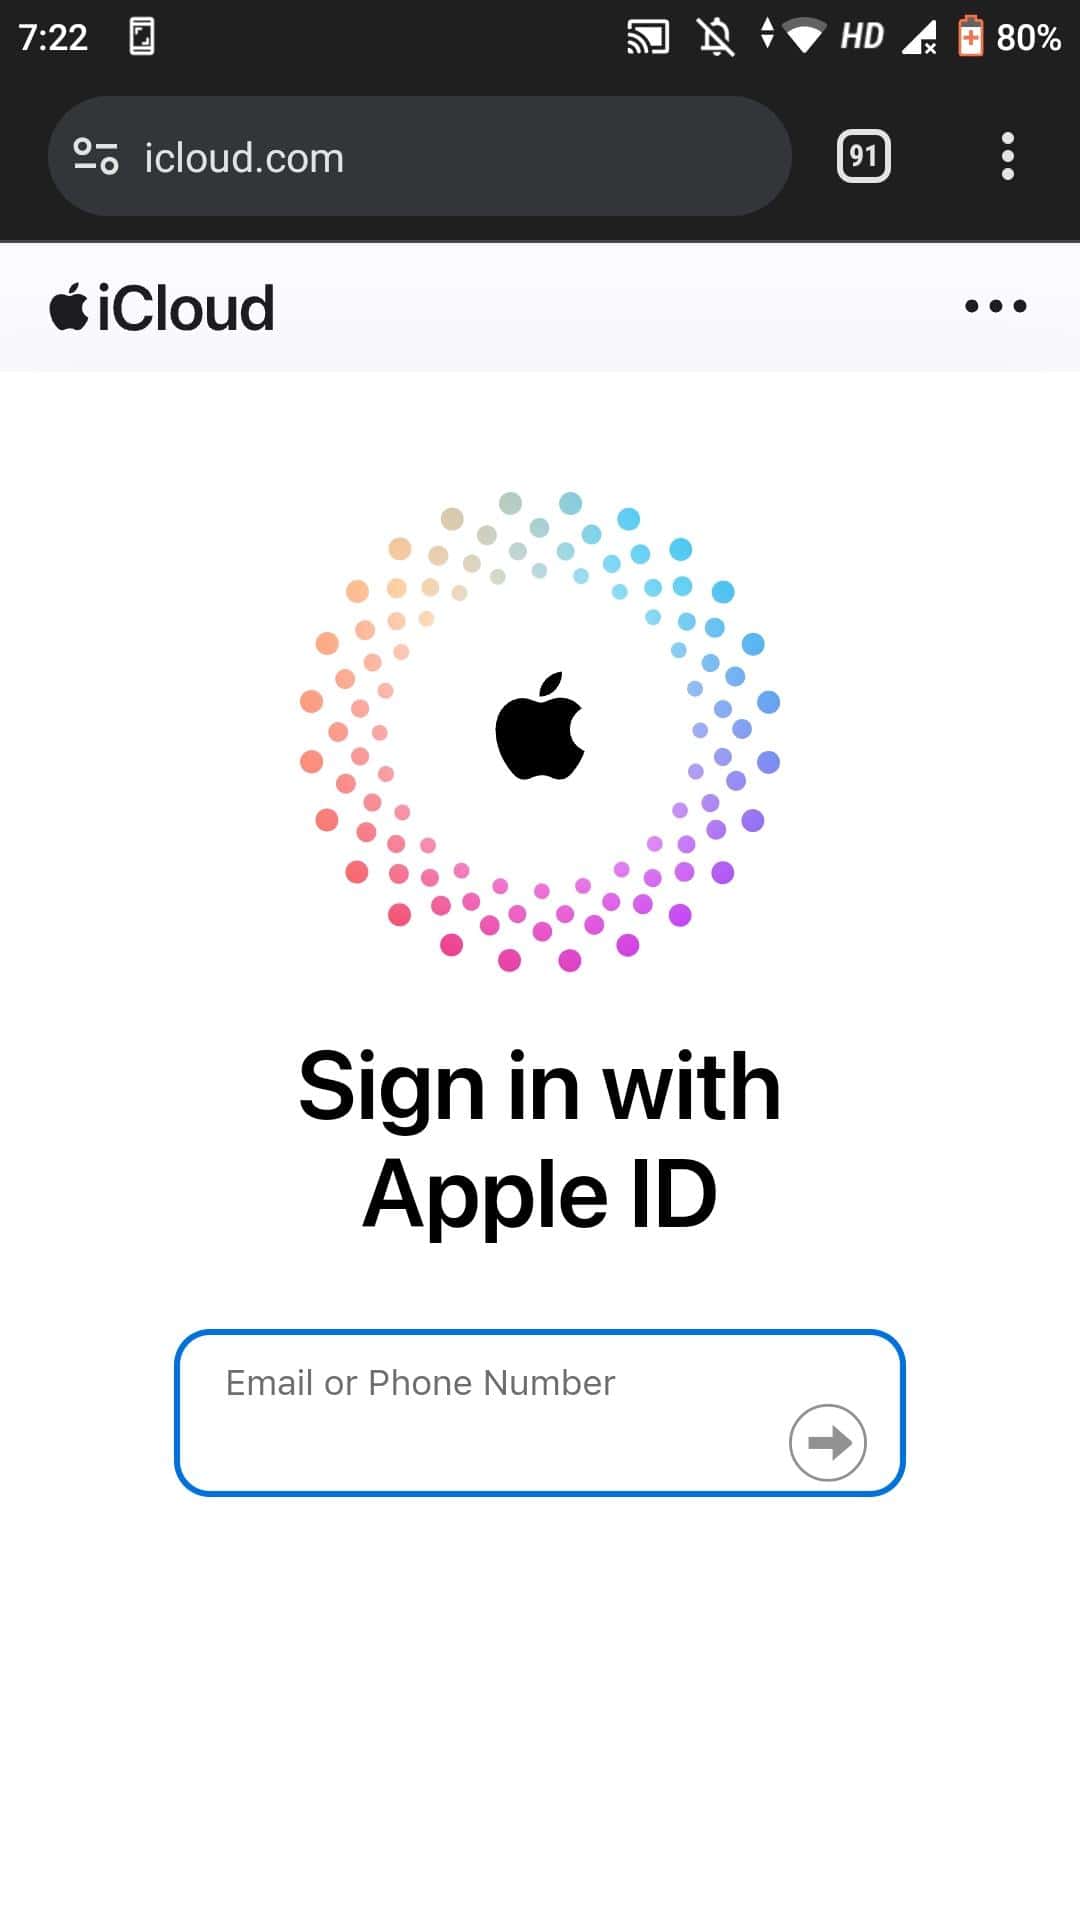 Sign In with your Apple ID 